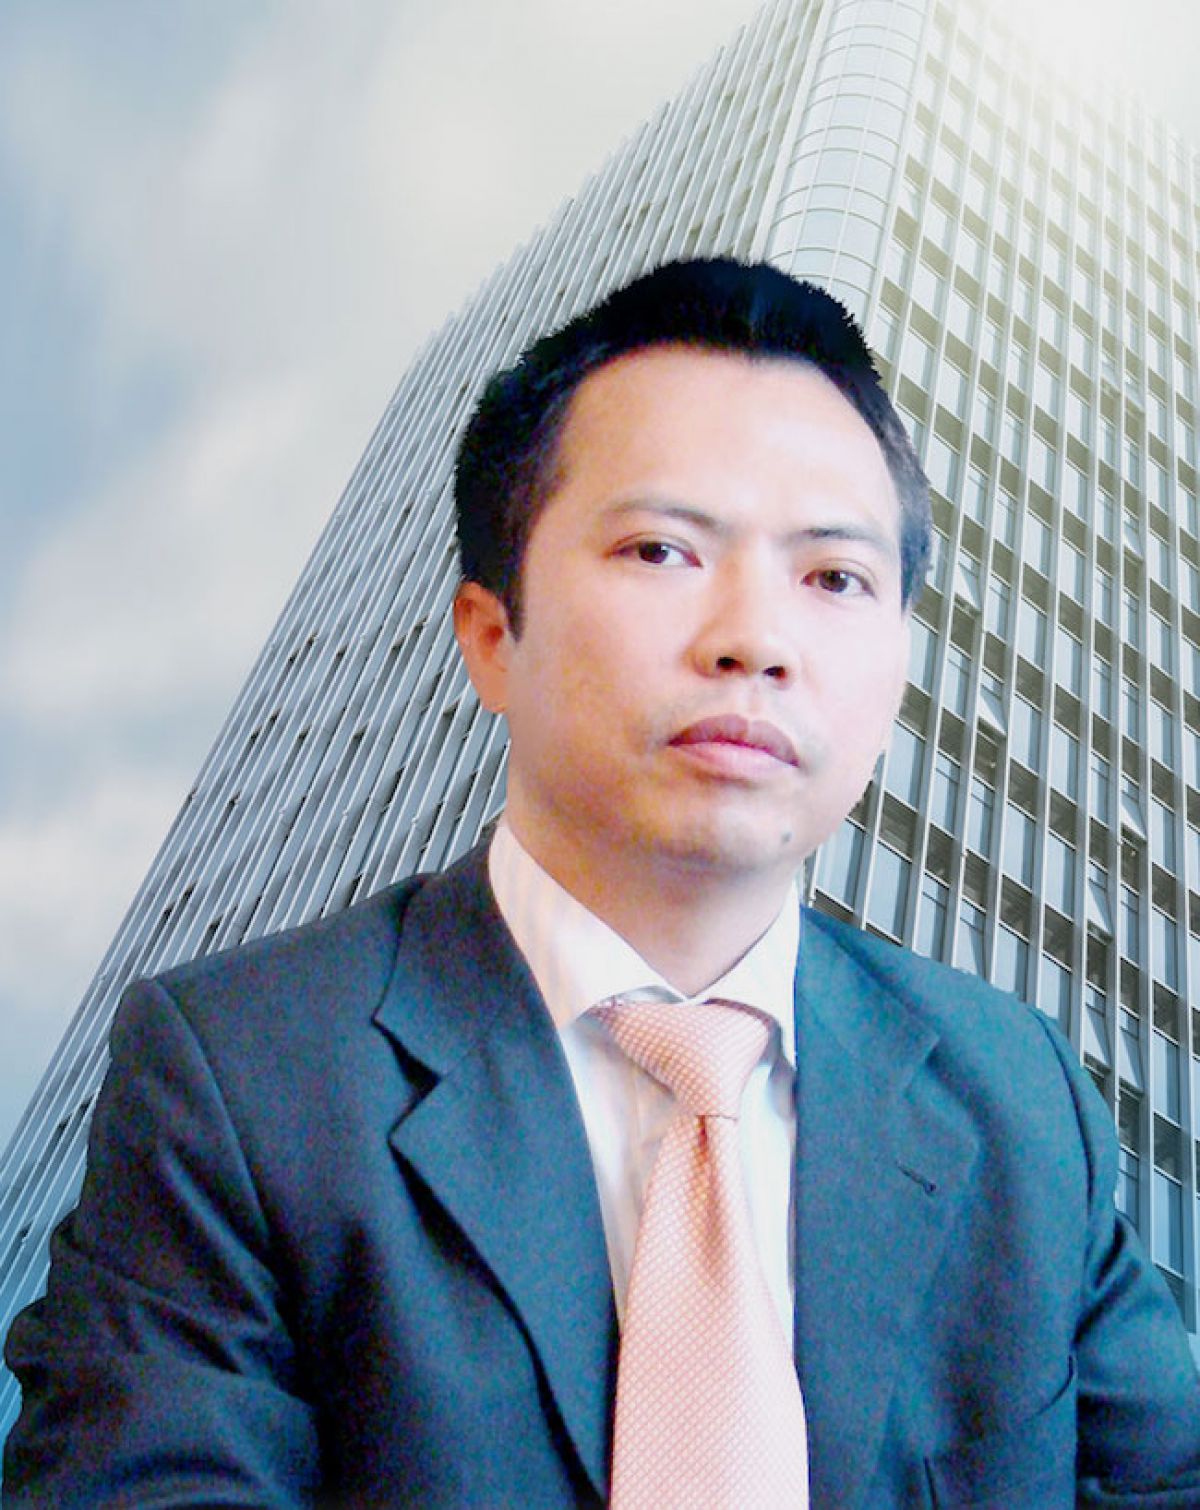 Sohovietnam chairman Phan Xuan Can has advised a dozen of M&A deals in the real estate market.